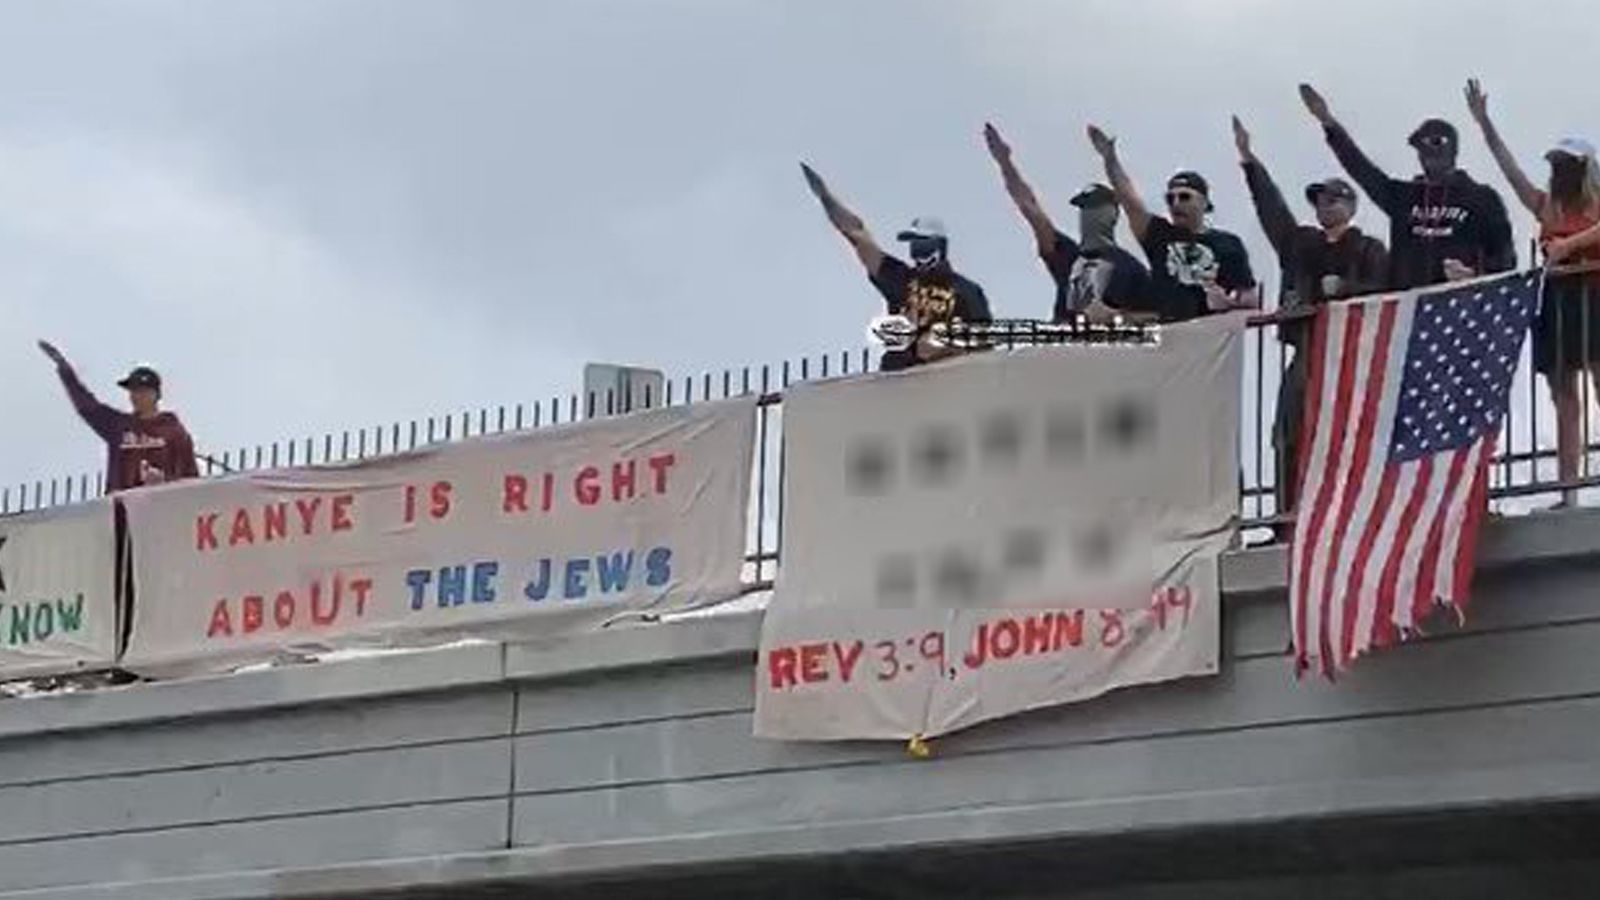 Kanye West: Los Angeles officials condemn demonstrators seen in photos showing support of rapper's antisemitic remarks | CNN